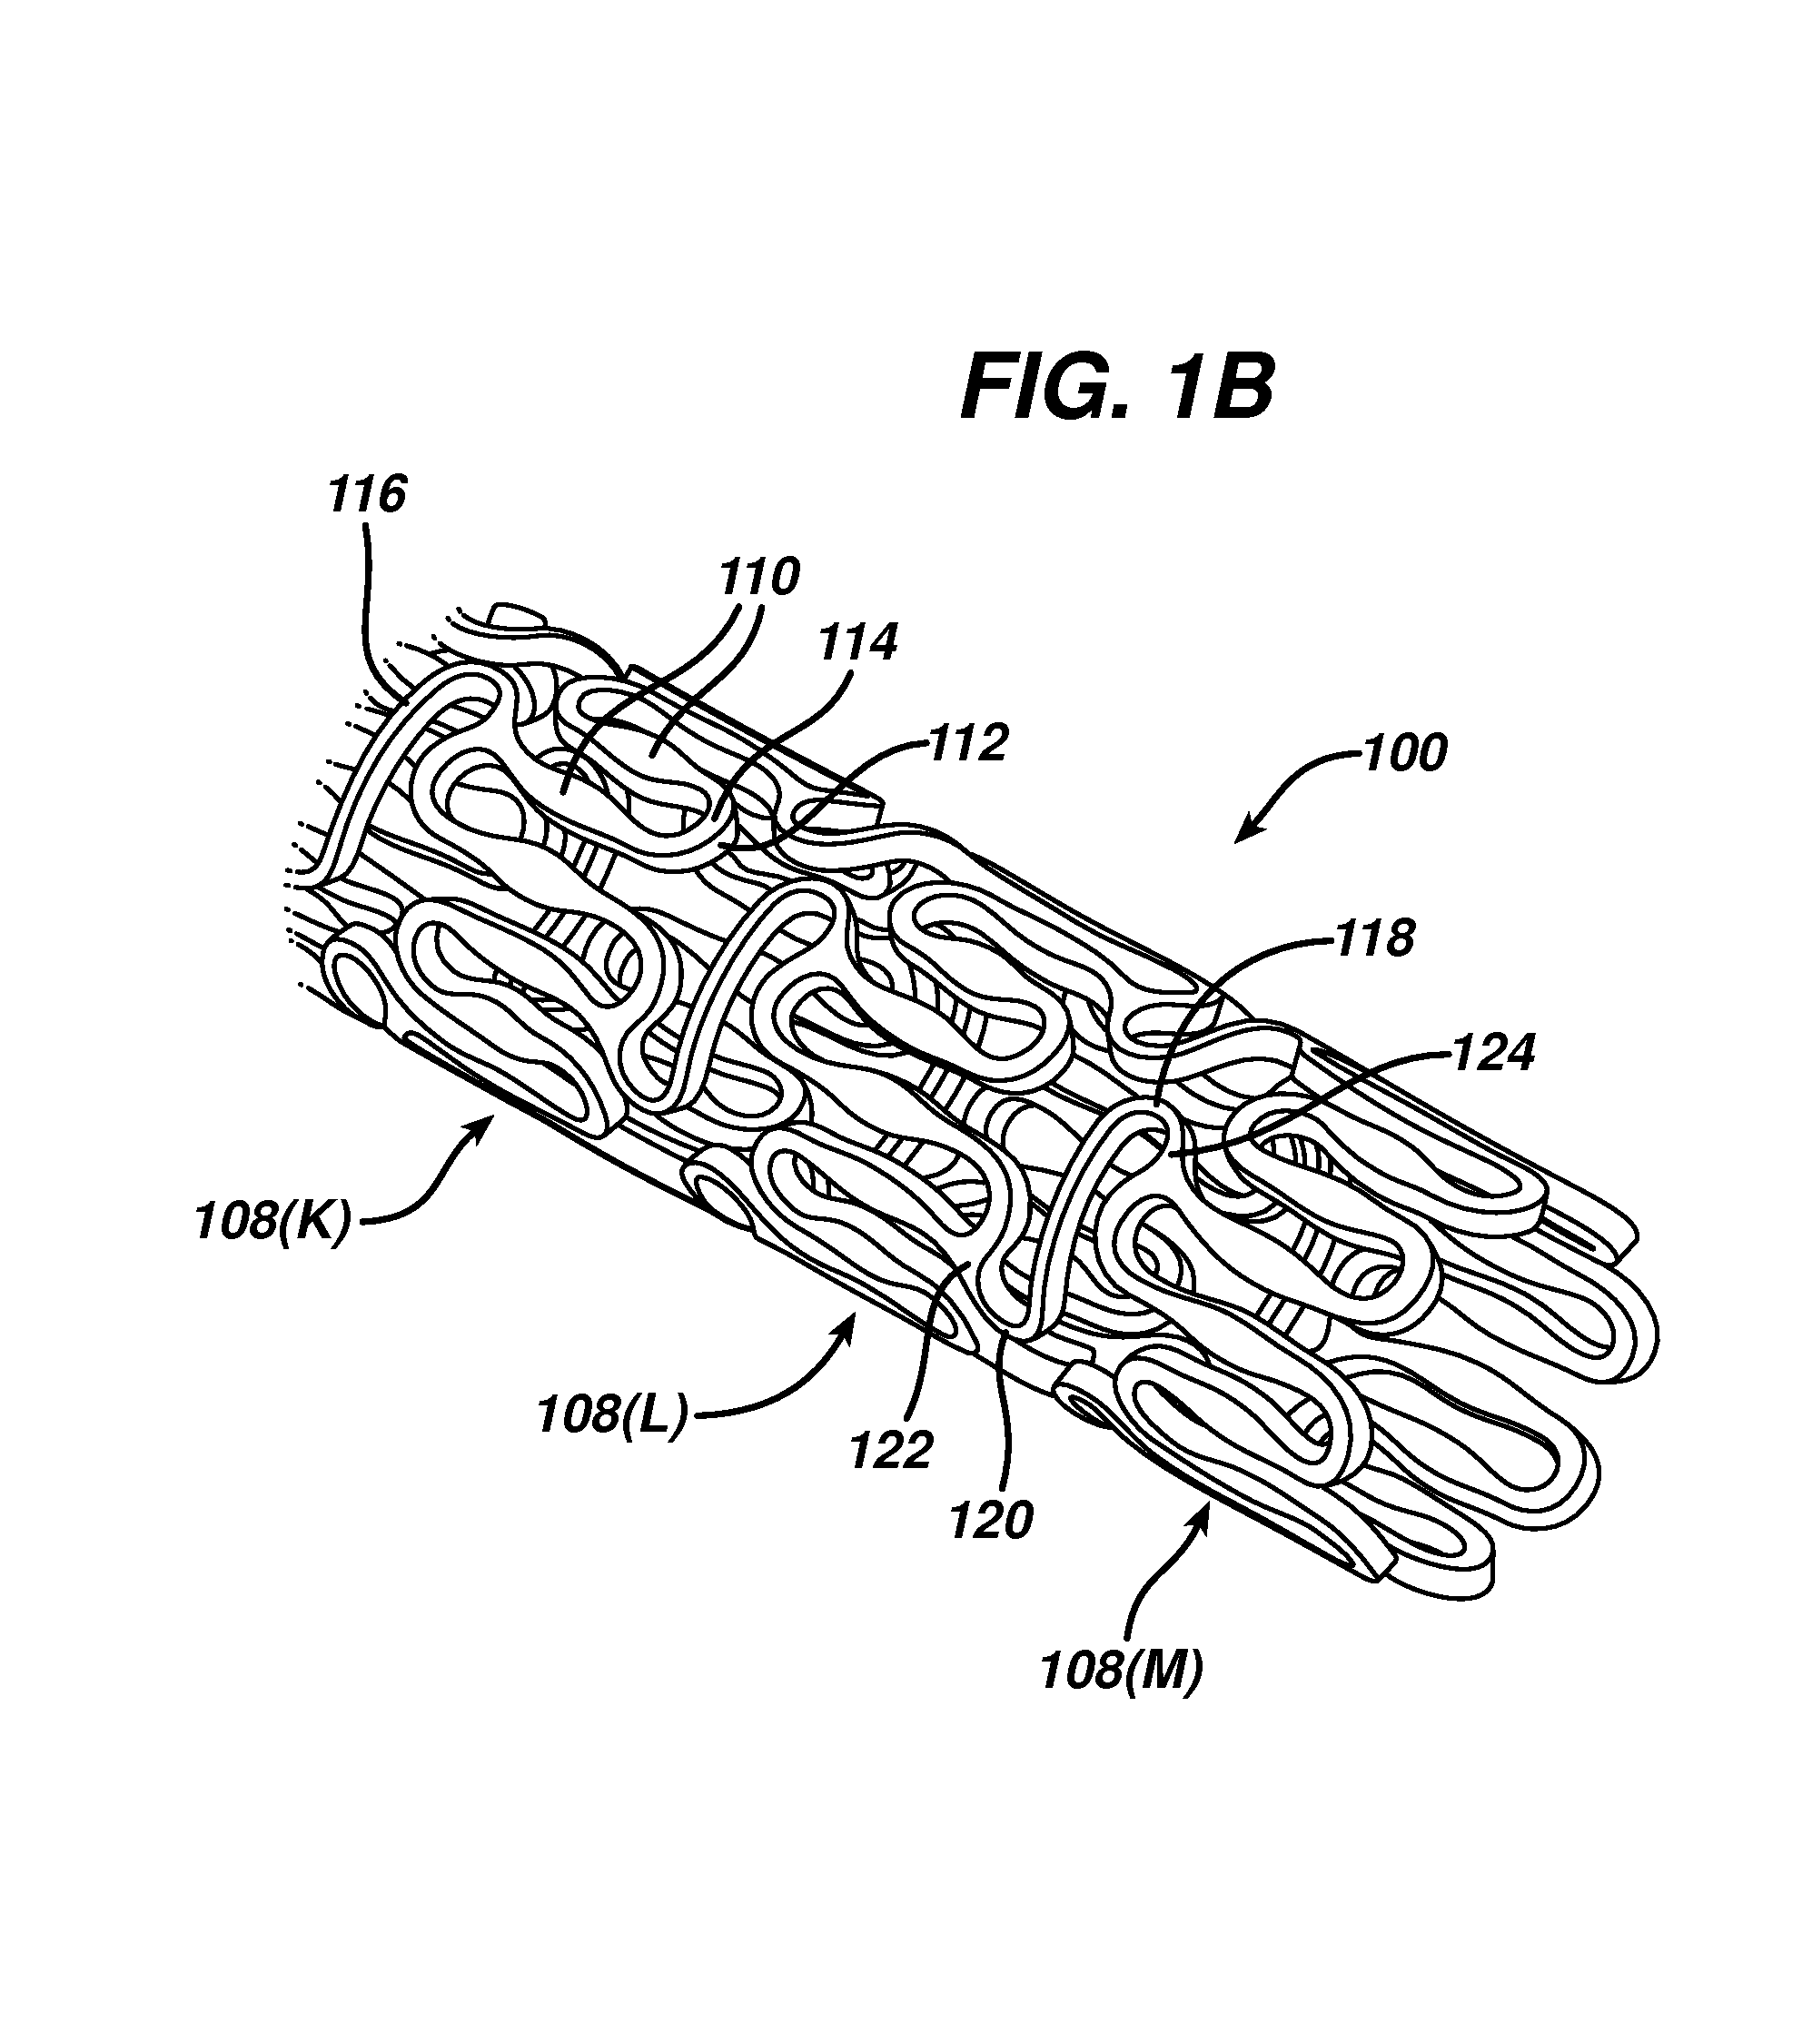 Method for placing a medical device at a bifurcated conduit